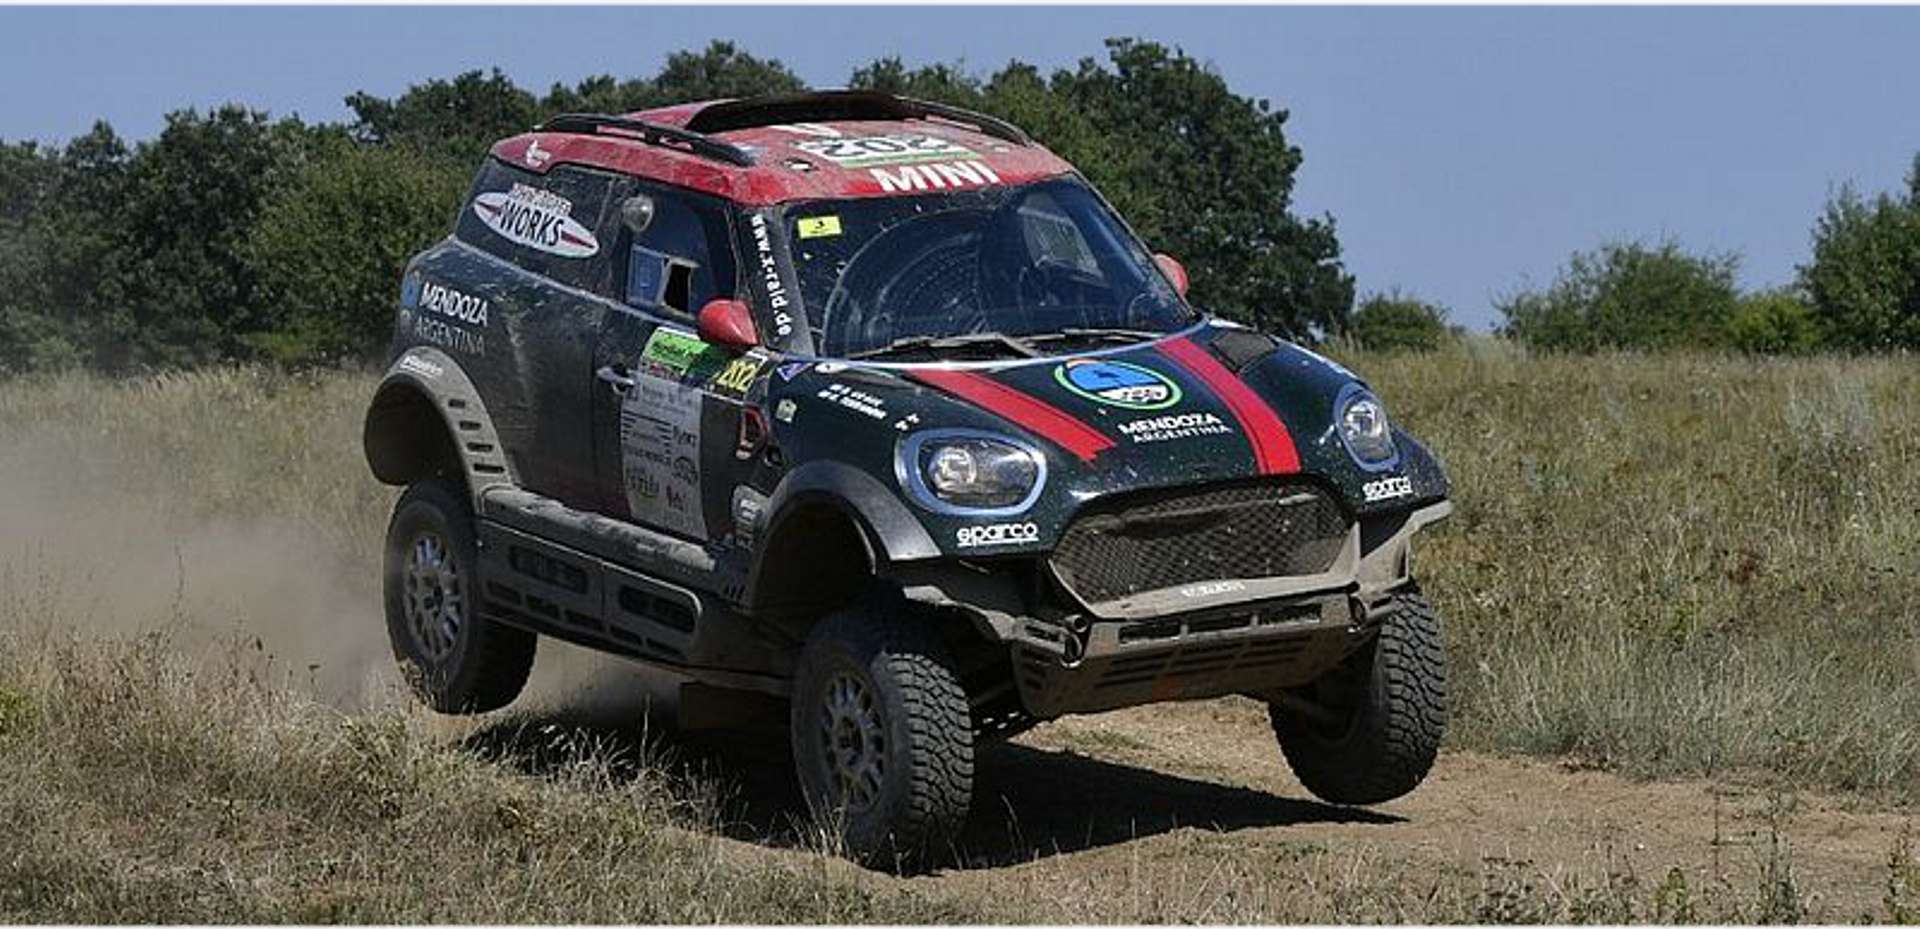 Hungarian Baja 2019: 2nd day - Long stage, big heat, awesome rivalries